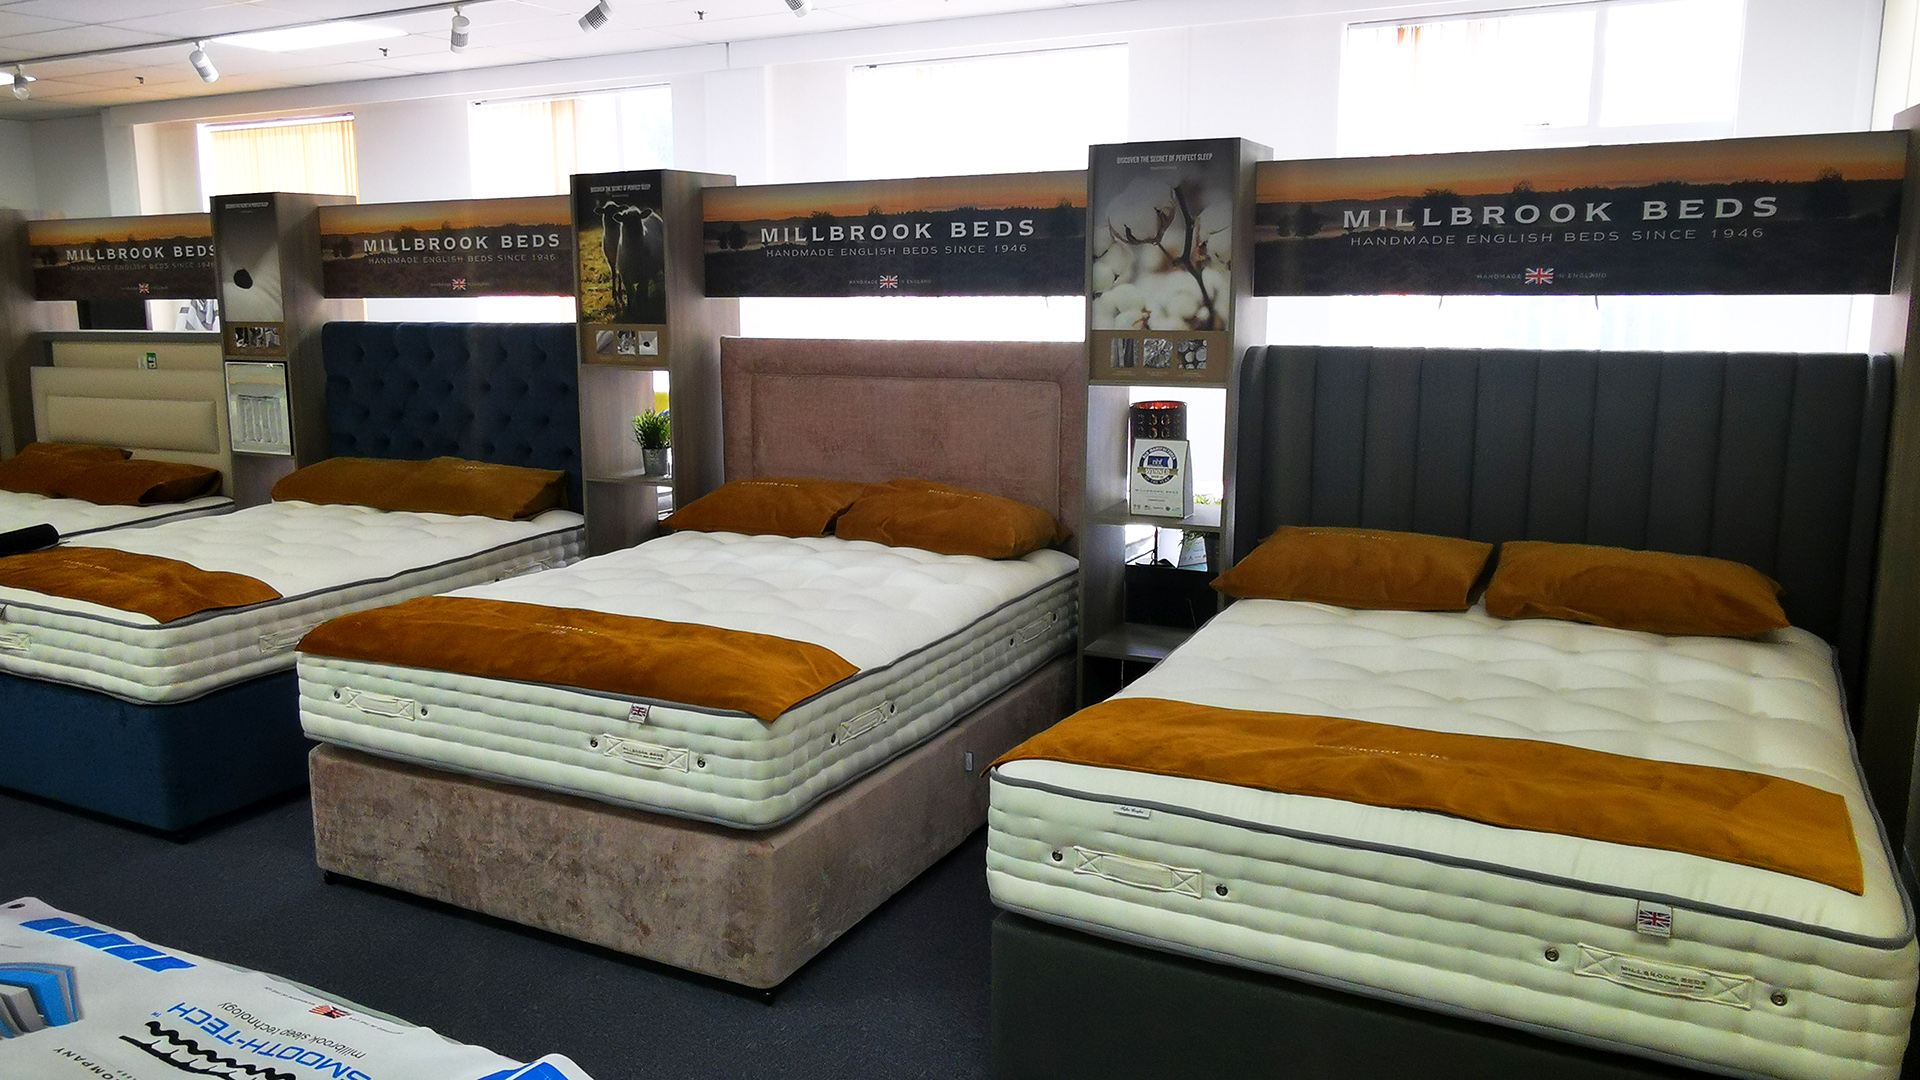 shop display graphics for millbrook beds